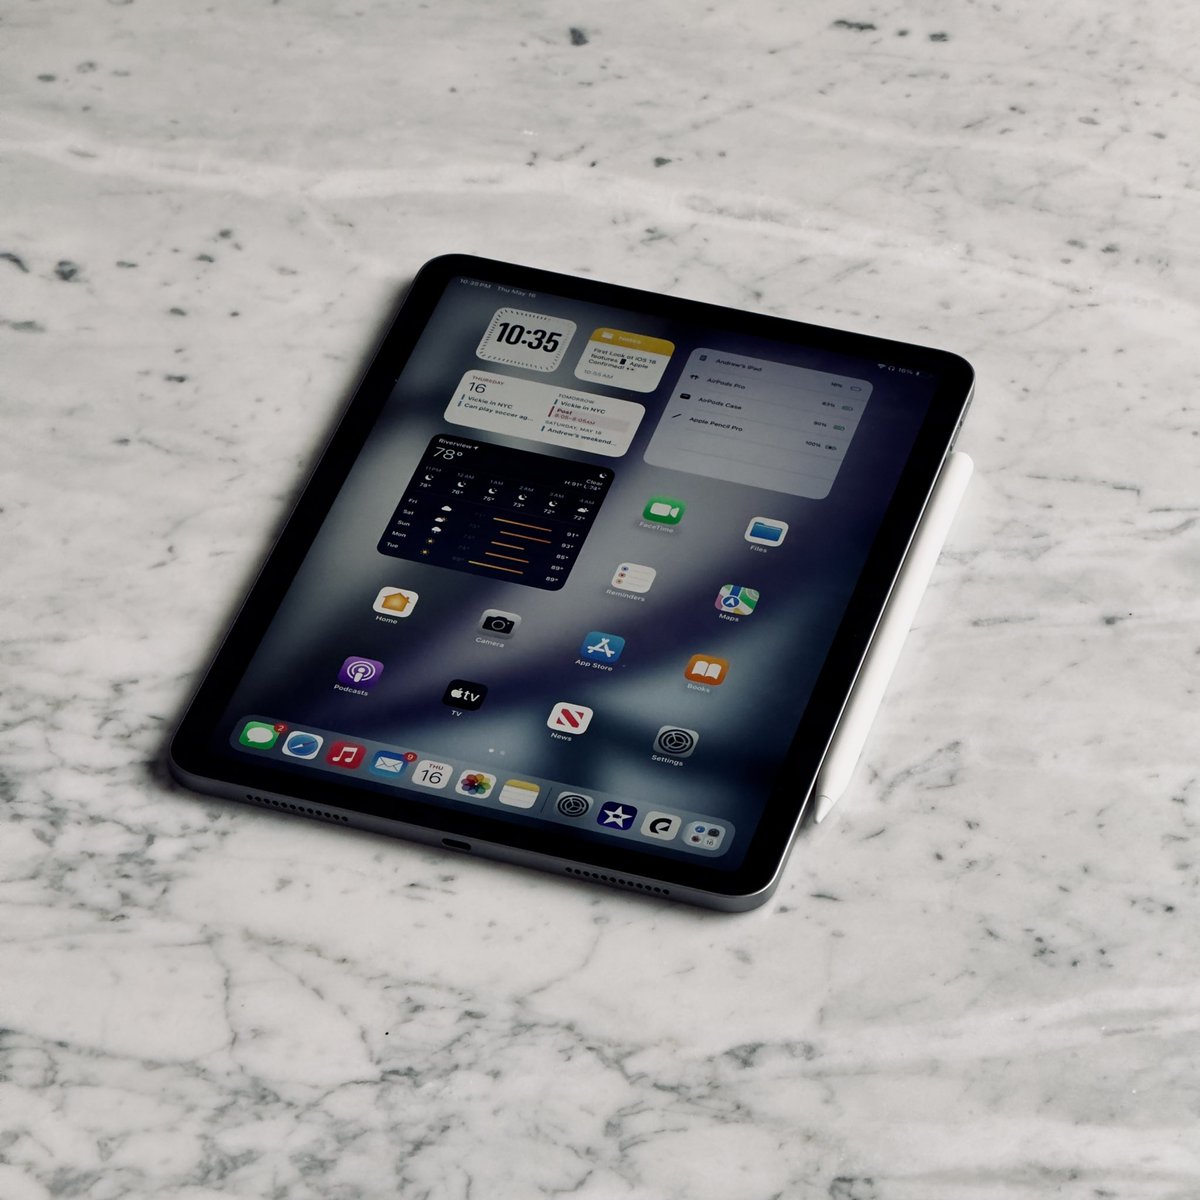 First day with M2 iPad Air was really really good - Faster and snappier than the M1 Air - Great battery life - Quick 4K video export - Fantastic Apple Pencil Pro - More consistent AirDrop - Love the Space Gray color Full review in the works so stay tuned 👀